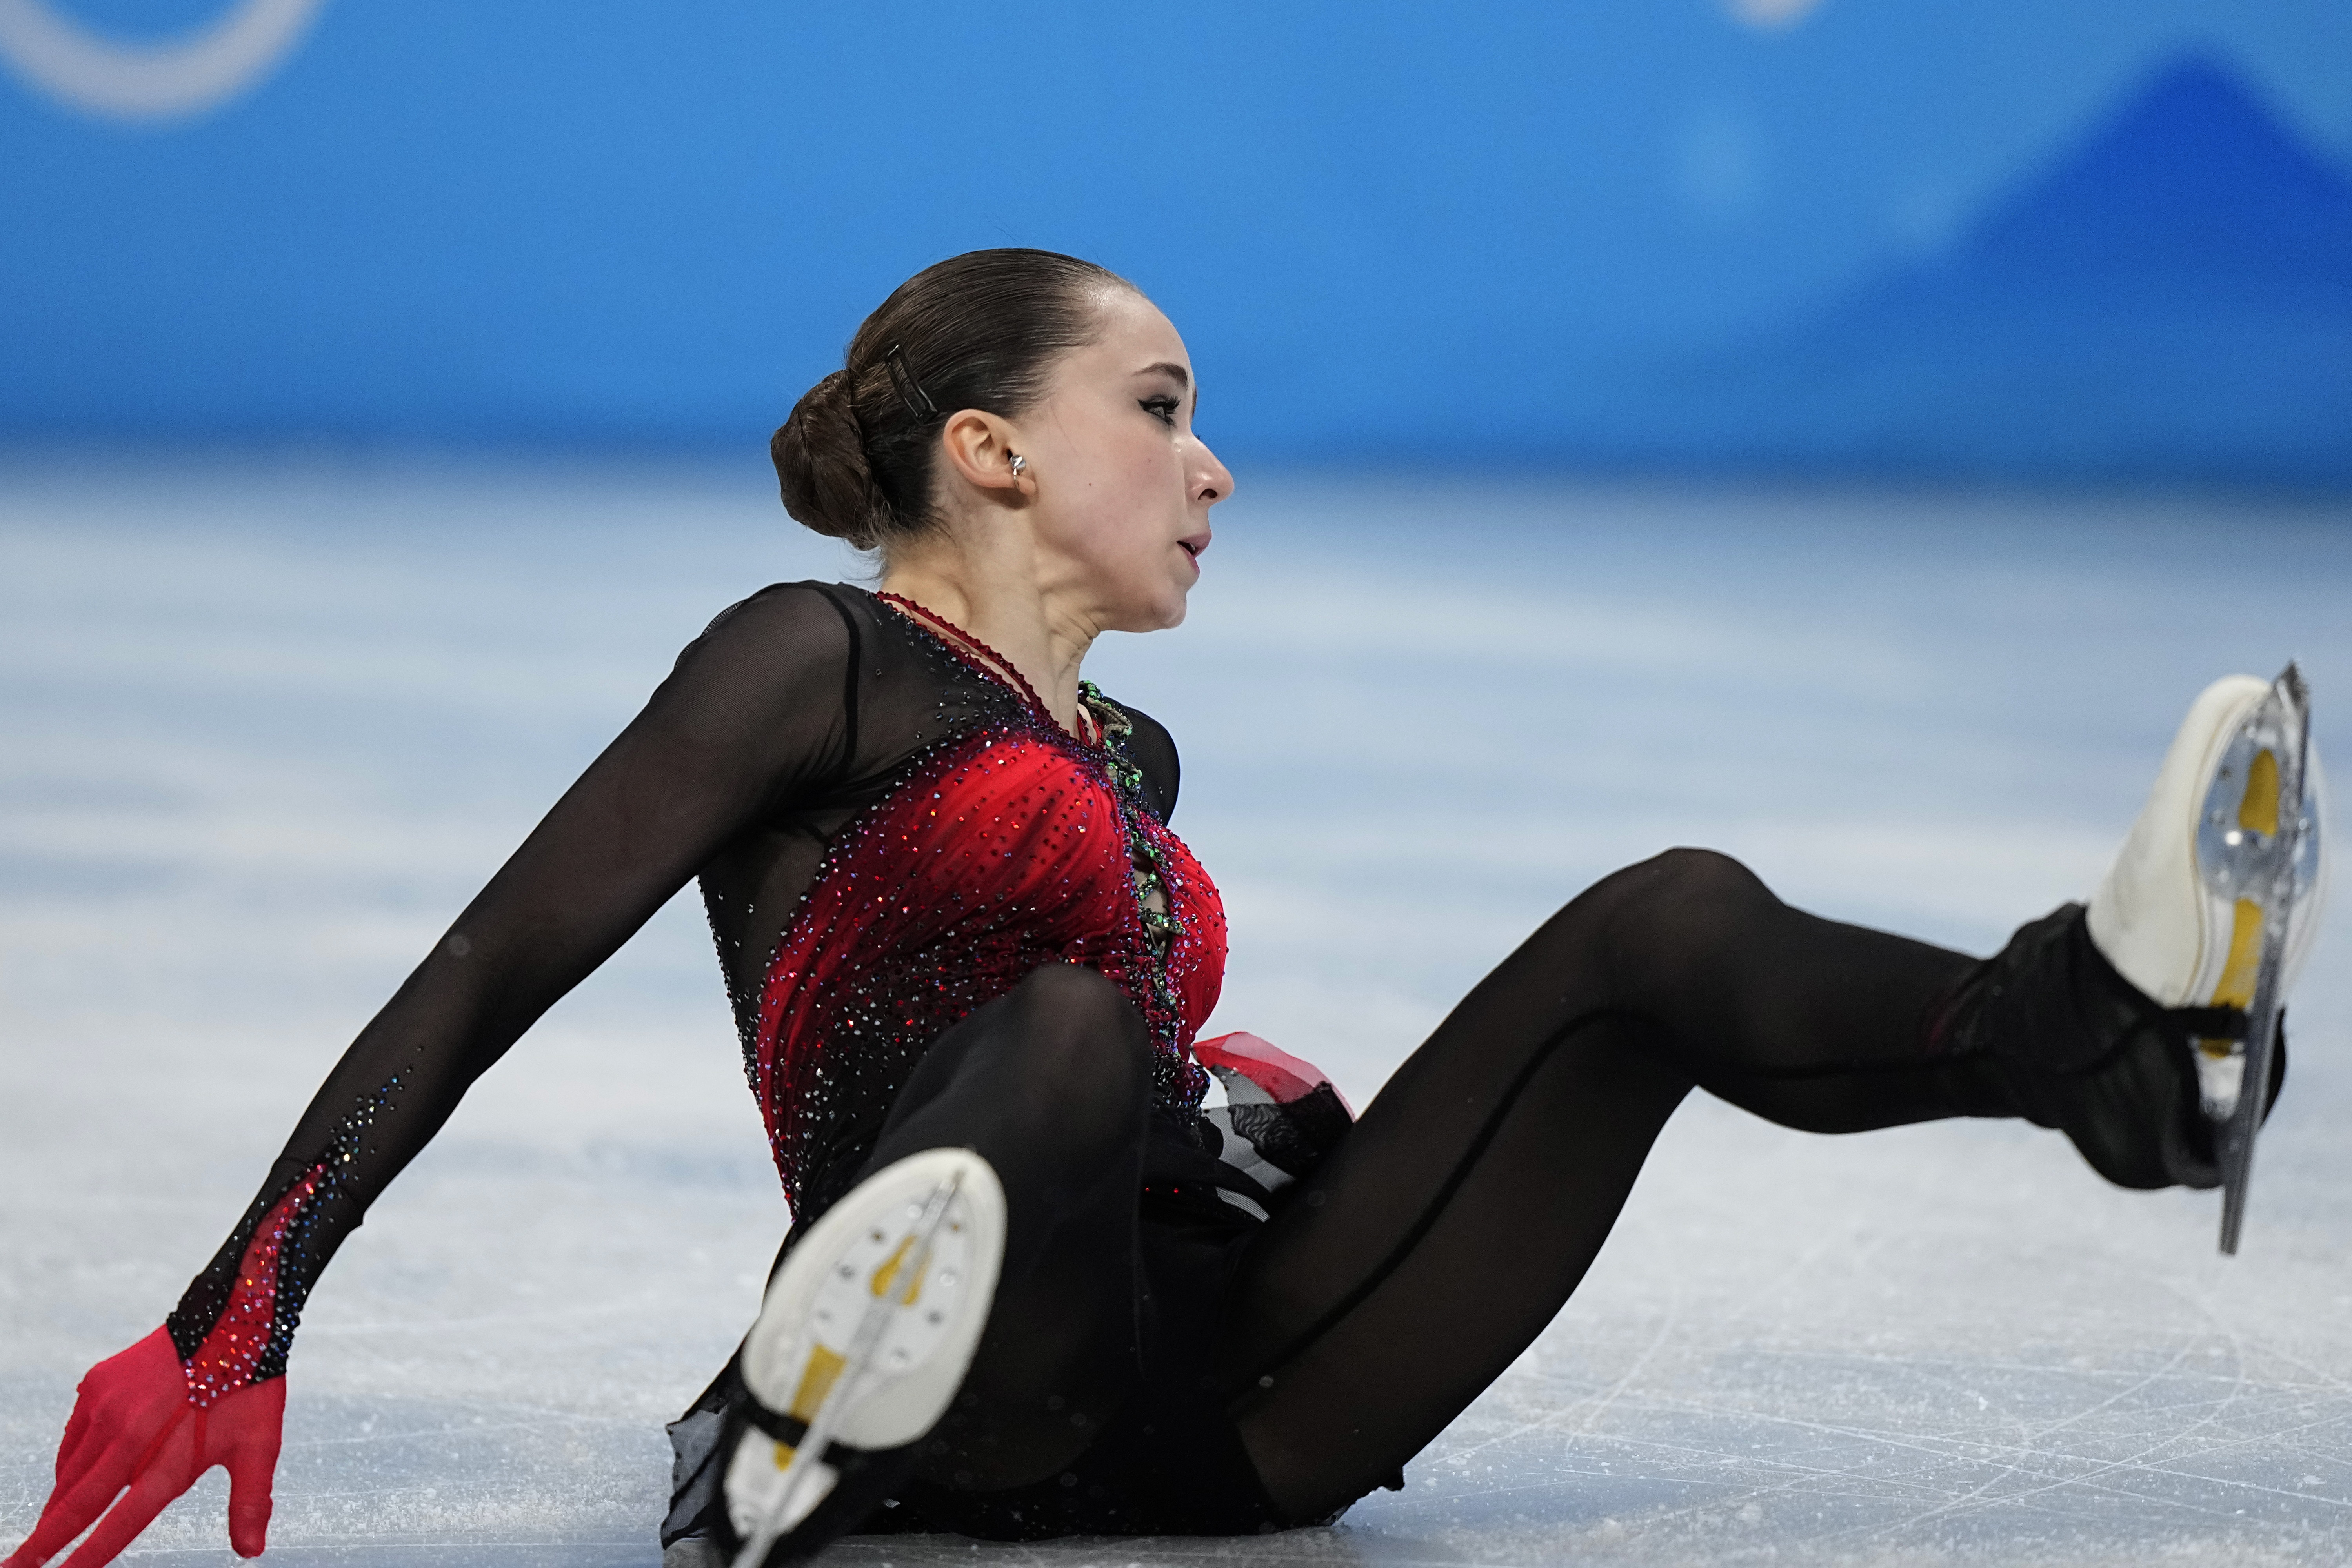 Allowed to compete in Olympics despite positive drug test, Kamila Valieva fails to medal in figure skating